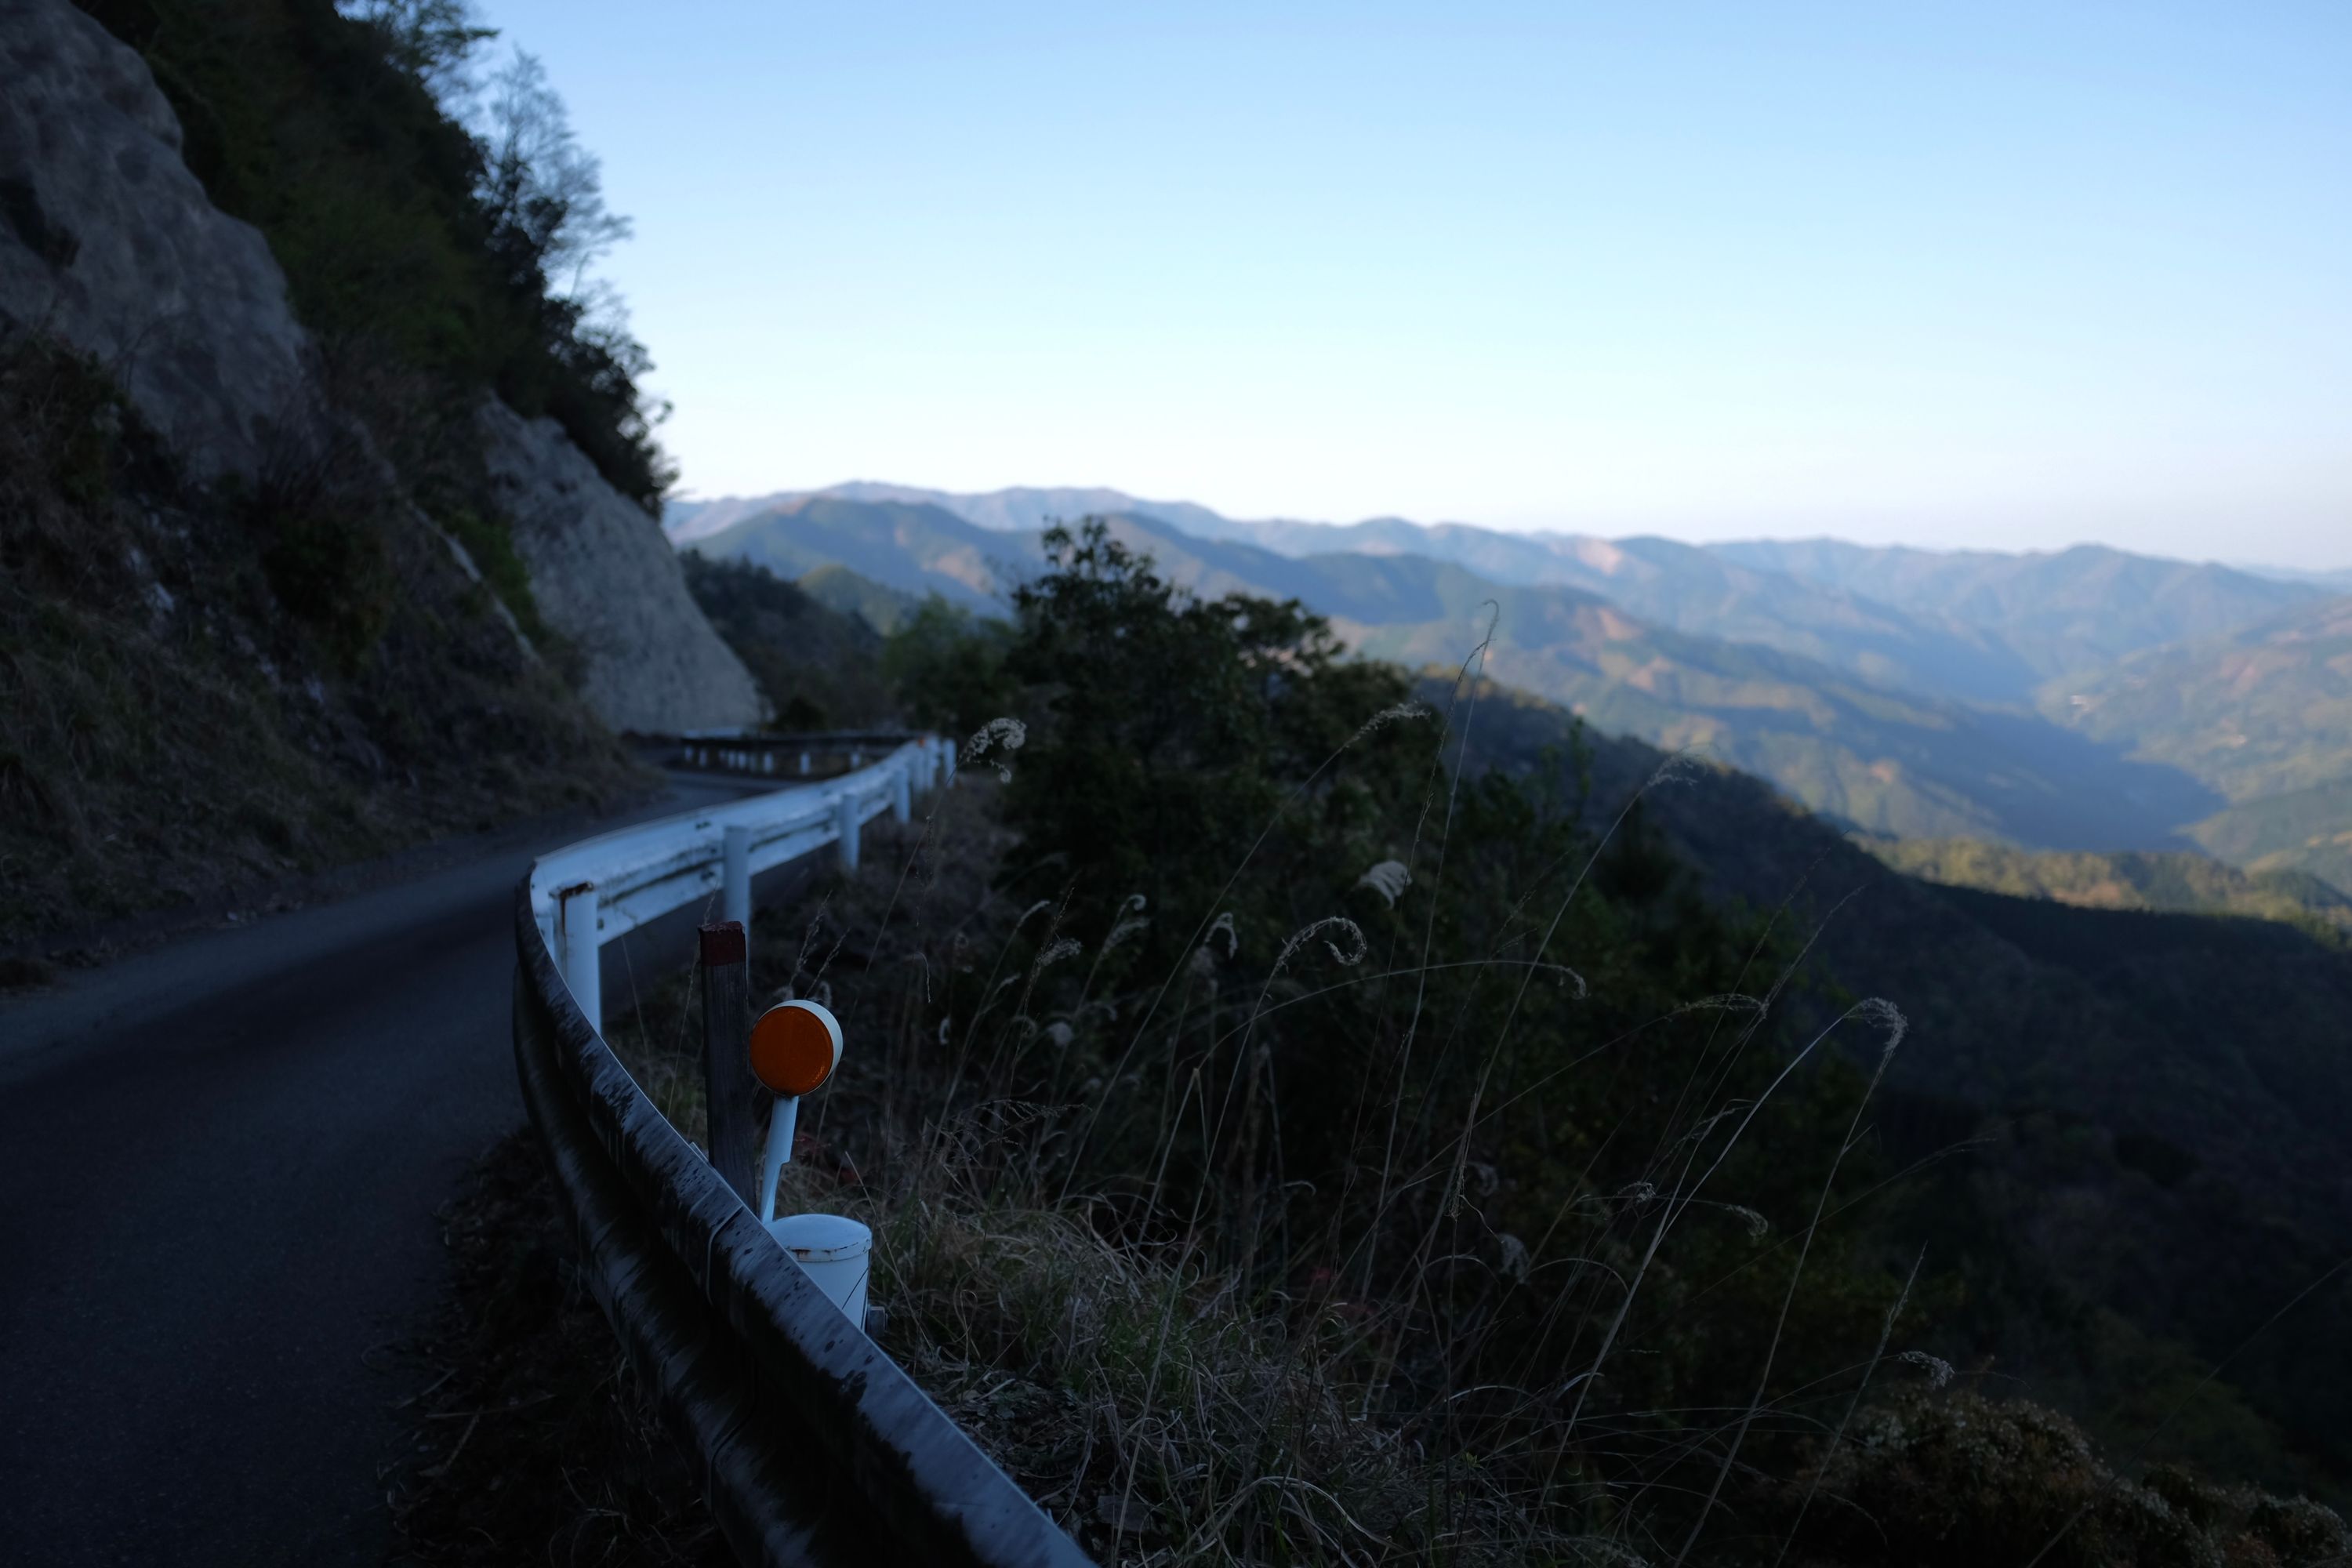 A narrow road goes over a mountain pass and reveals a landscape of forested hills.